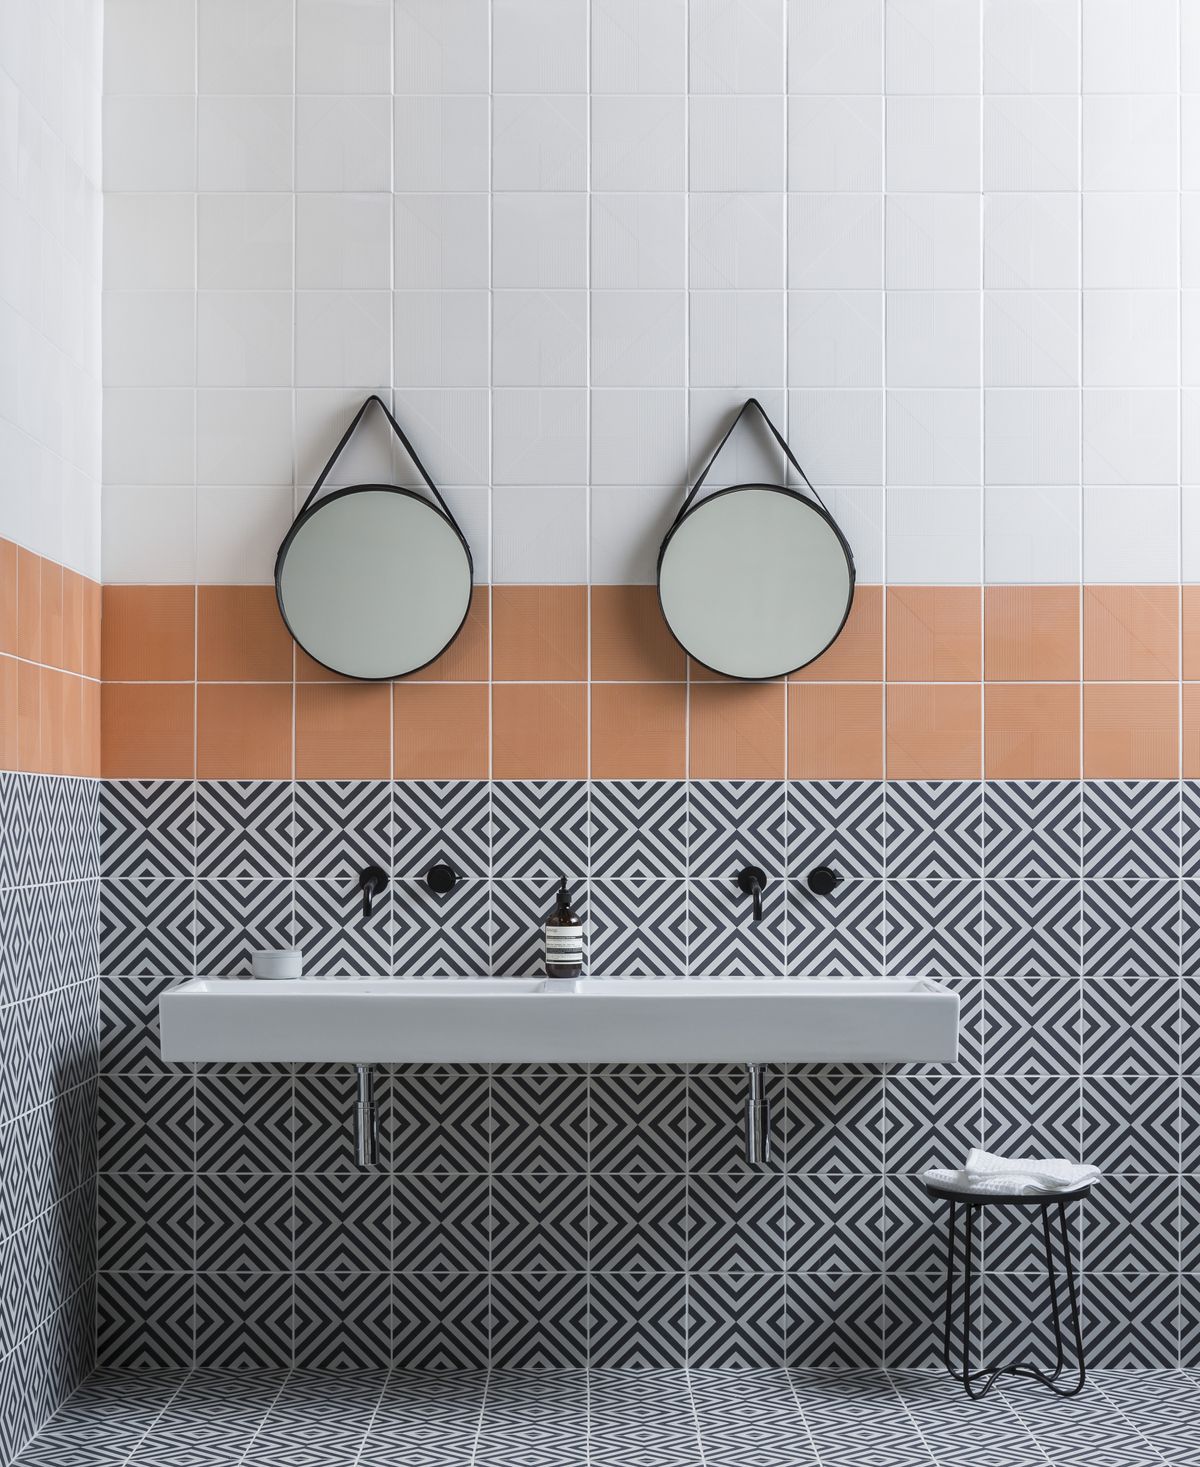 How To Choose Tiles For A Small Bathroom Design Tips To Help Open